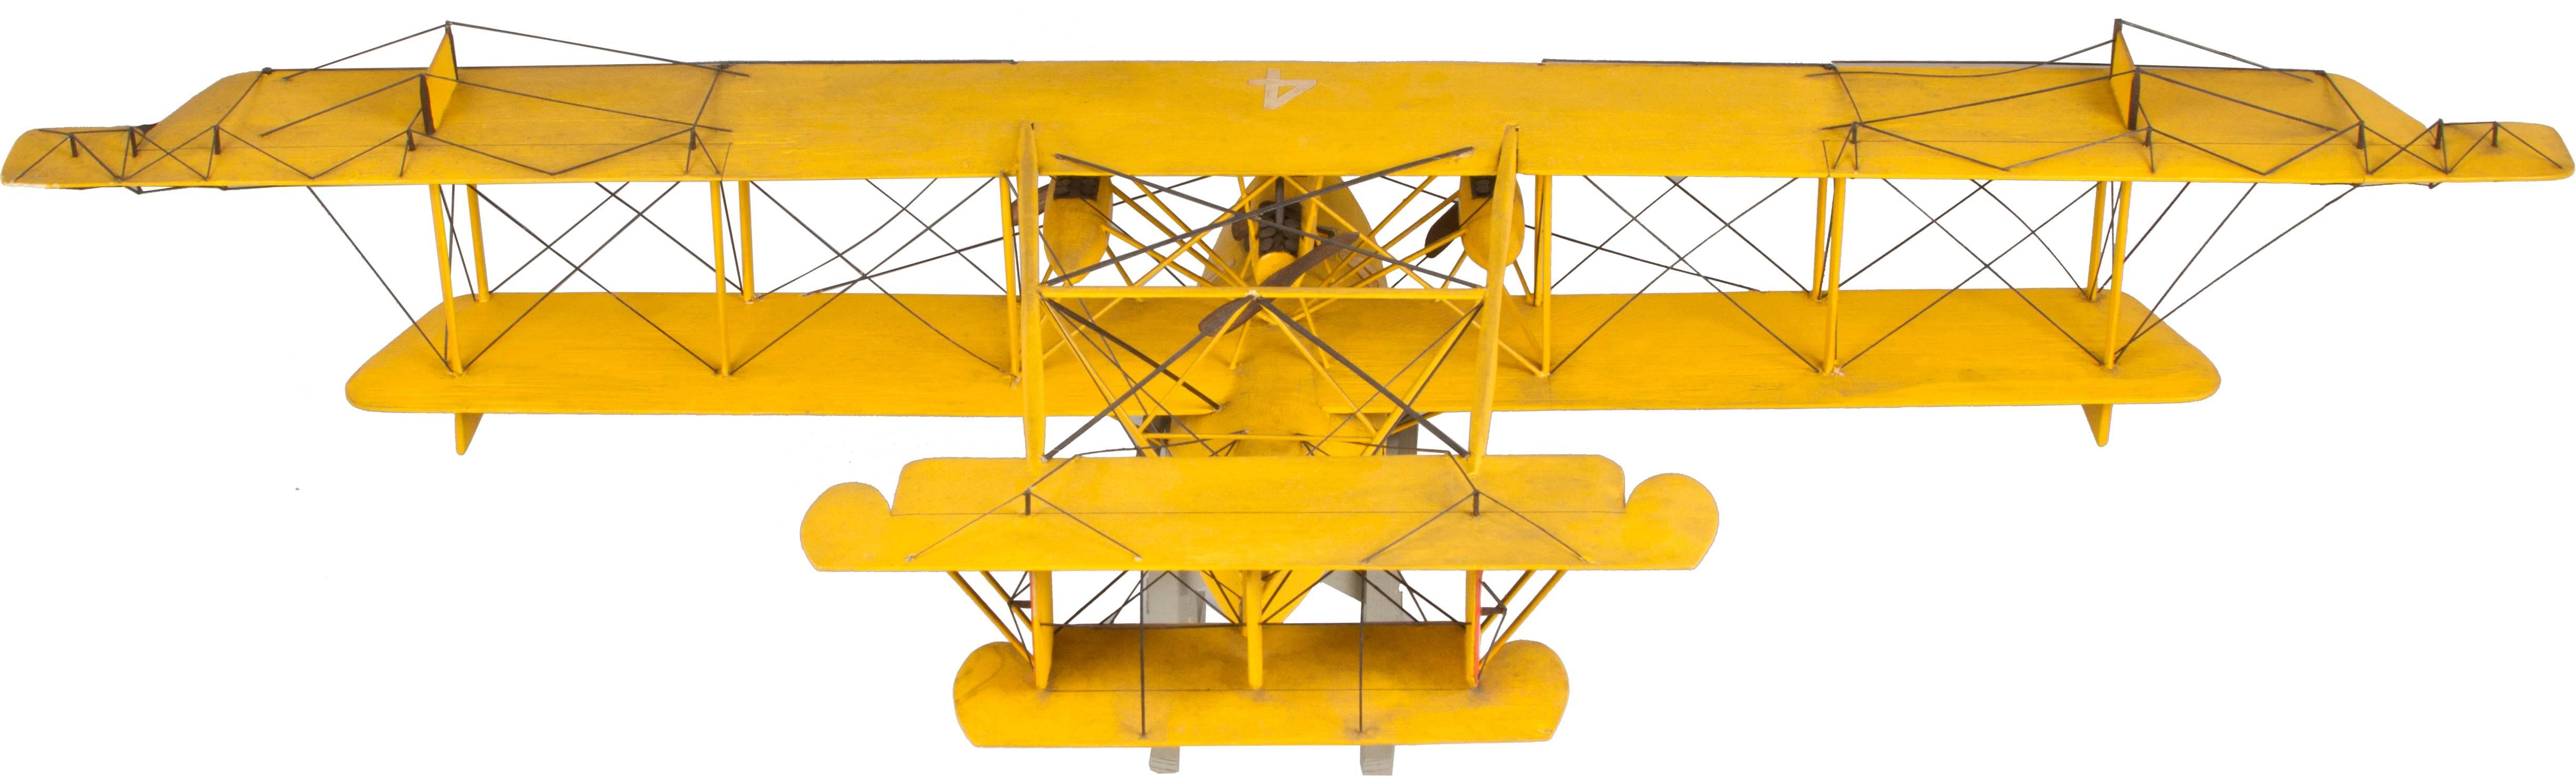 This sea plane was originally seen between 1918 and 1920s and this model, made of paper and balsa wood, was made in the 1930s.